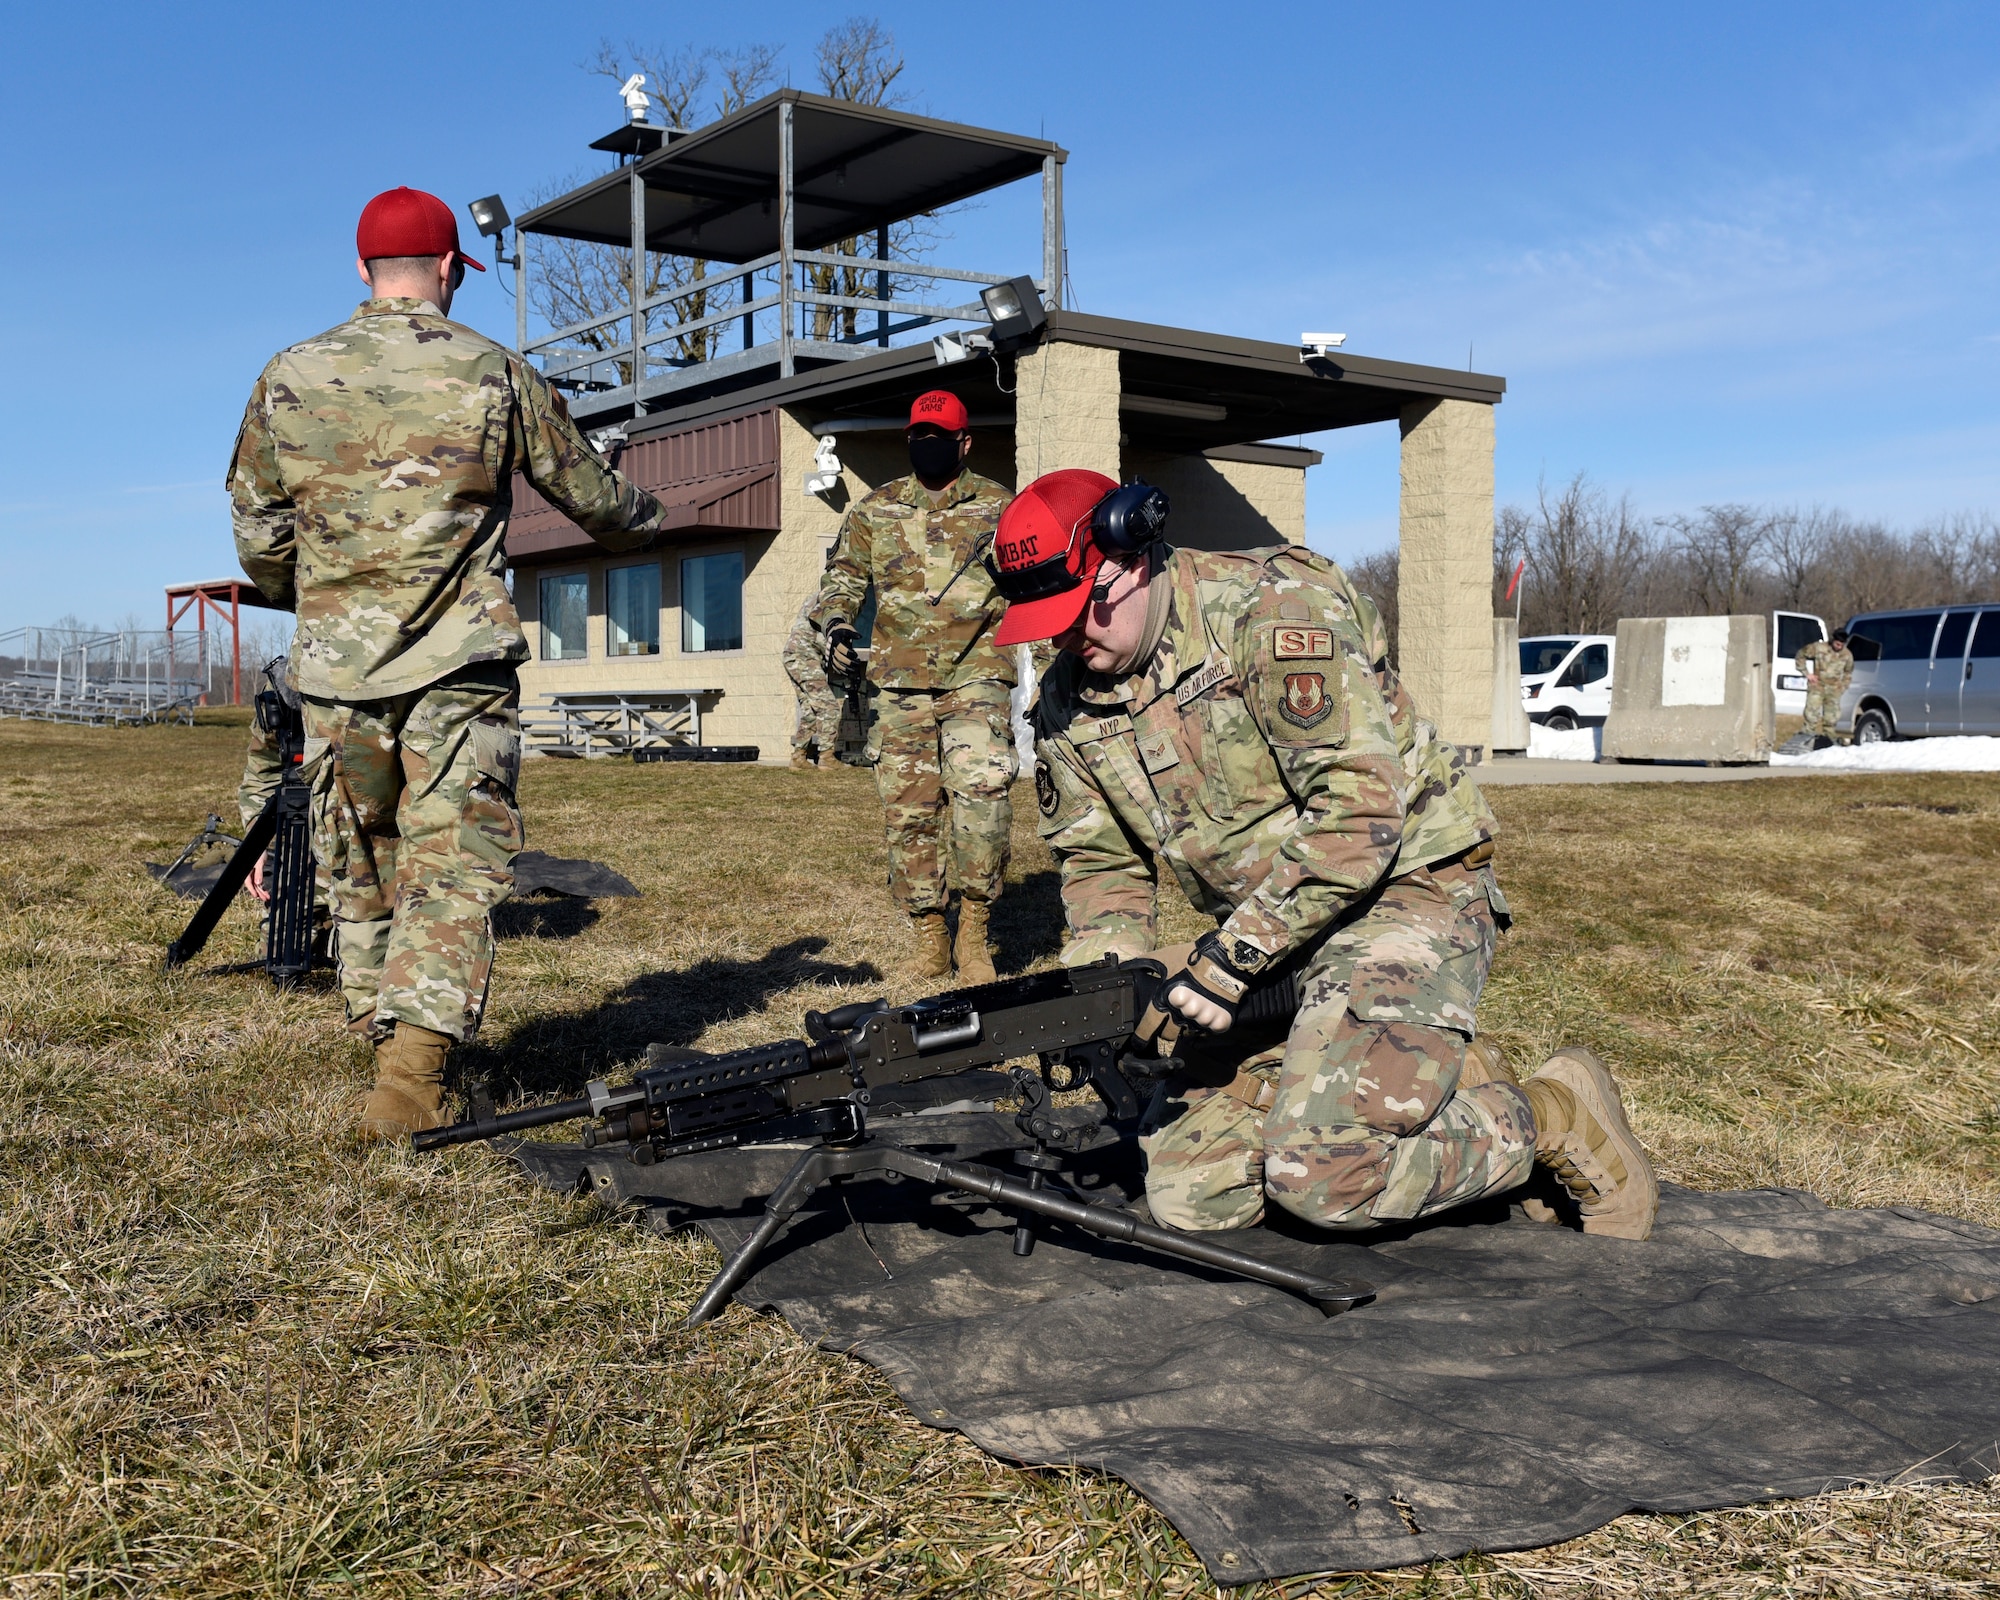 Air Force combat arms instructors with the 88th Security Forces Squadron assemble an M240B machine gun on a shooting range at Camp Atterbury in Edinburgh, Indiana, on Feb. 25, 2021. The combat arms instructors, from Wright-Patterson Air Force Base, Ohio, travel to Camp Atterbury multiple times each year for readiness and qualification training with deployers on machine guns and grenade launchers. (U.S. Air Force photo by Ty Greenlees)